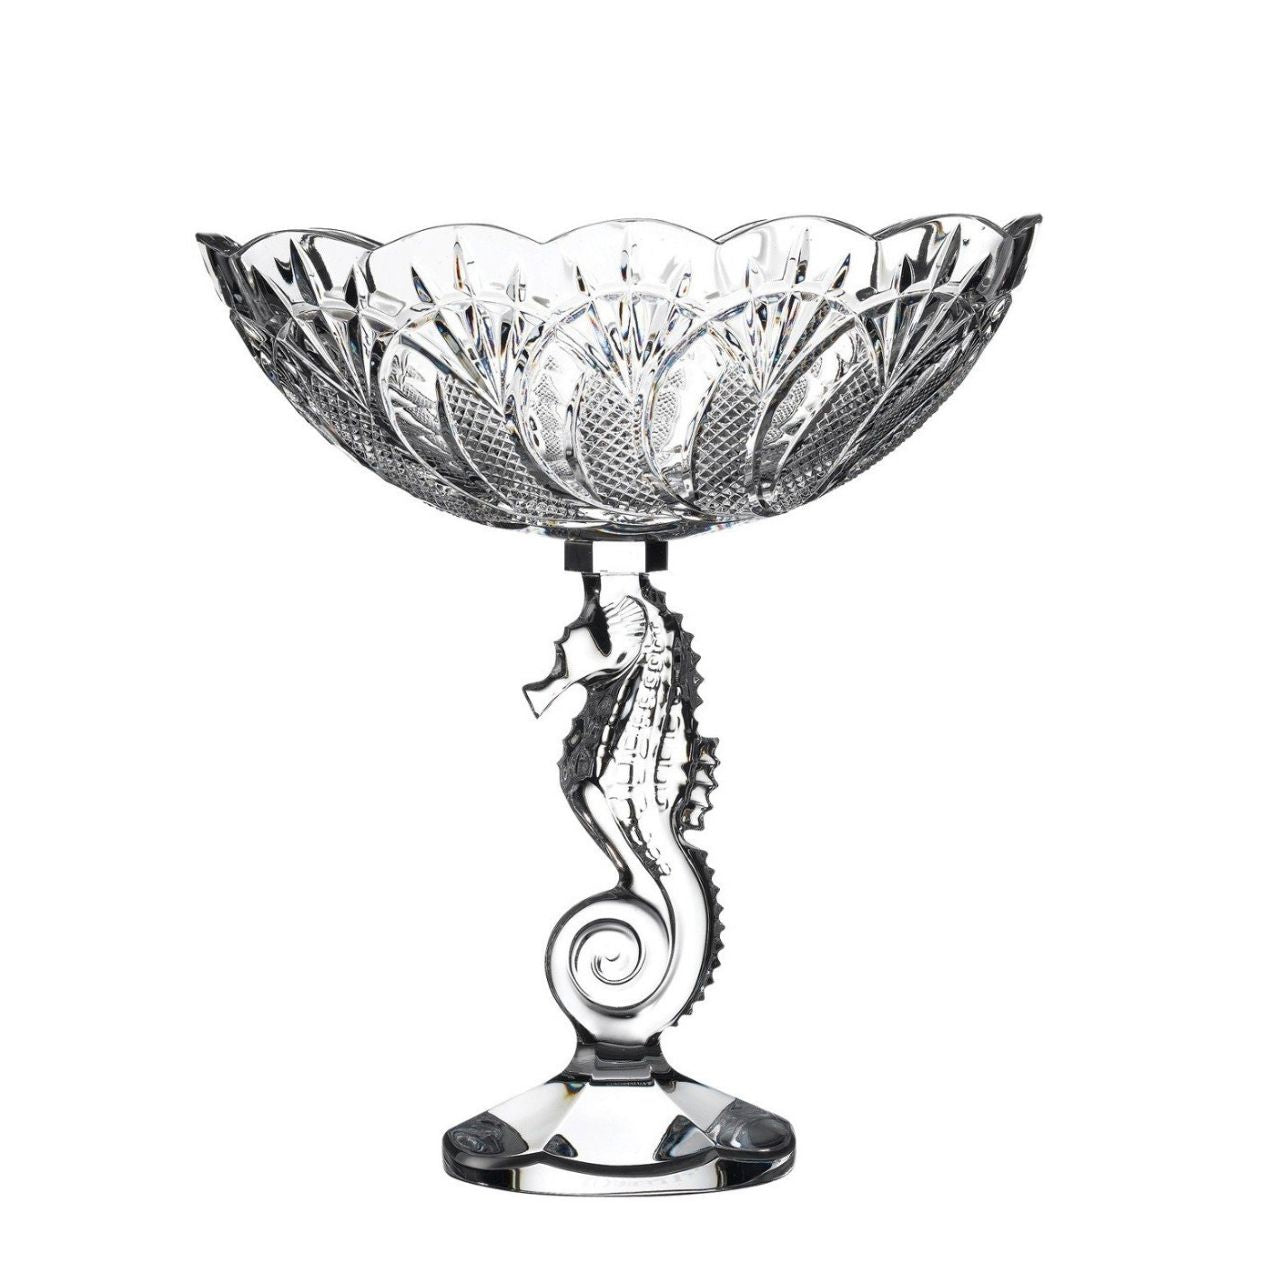 Waterford Crystal Seahorse Centrepiece Bowl  A dramatic statement piece, the Seahorse Collection by Waterford takes inspiration from the logo of the Waterford company and the crest of the historical city of Waterford, where Ireland's premiere fine crystal is produced.